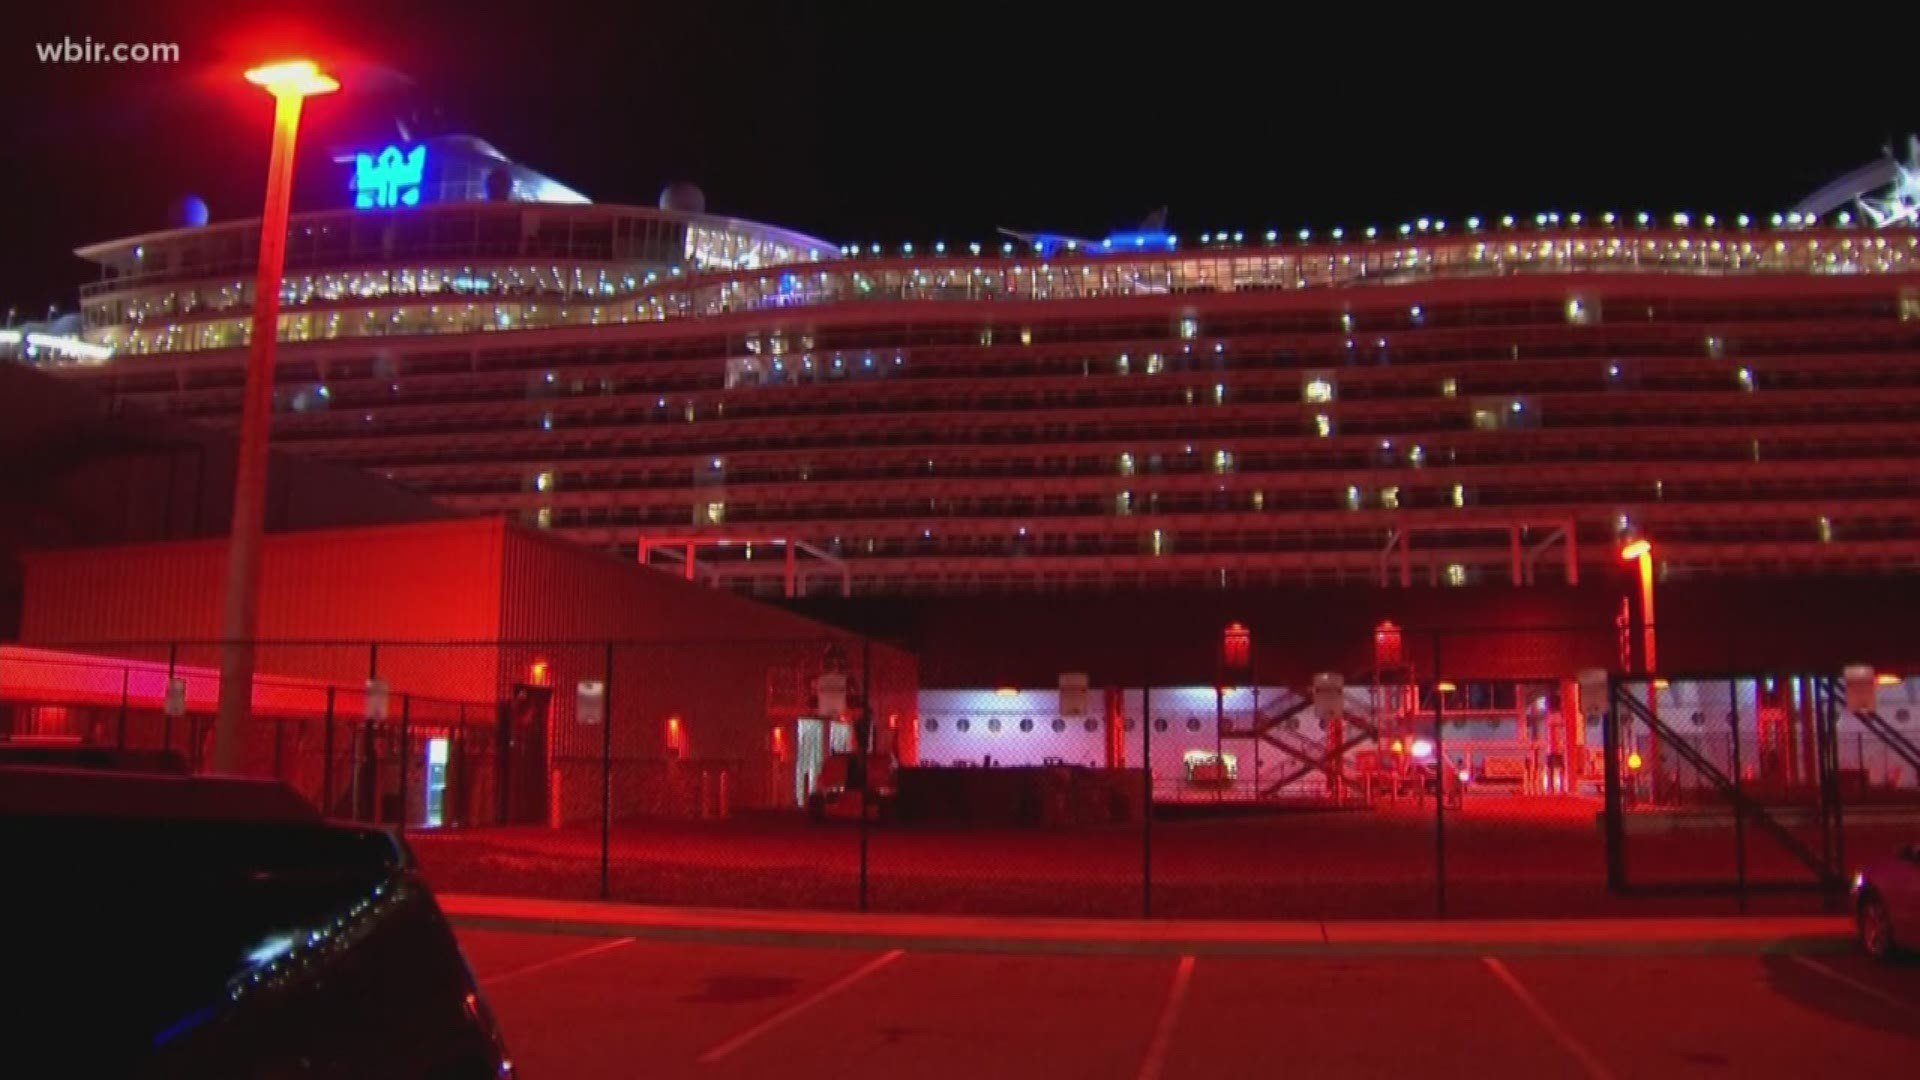 Hundreds of cruise ship passengers are recovering after getting sick while on a Royal Caribbean Cruise.